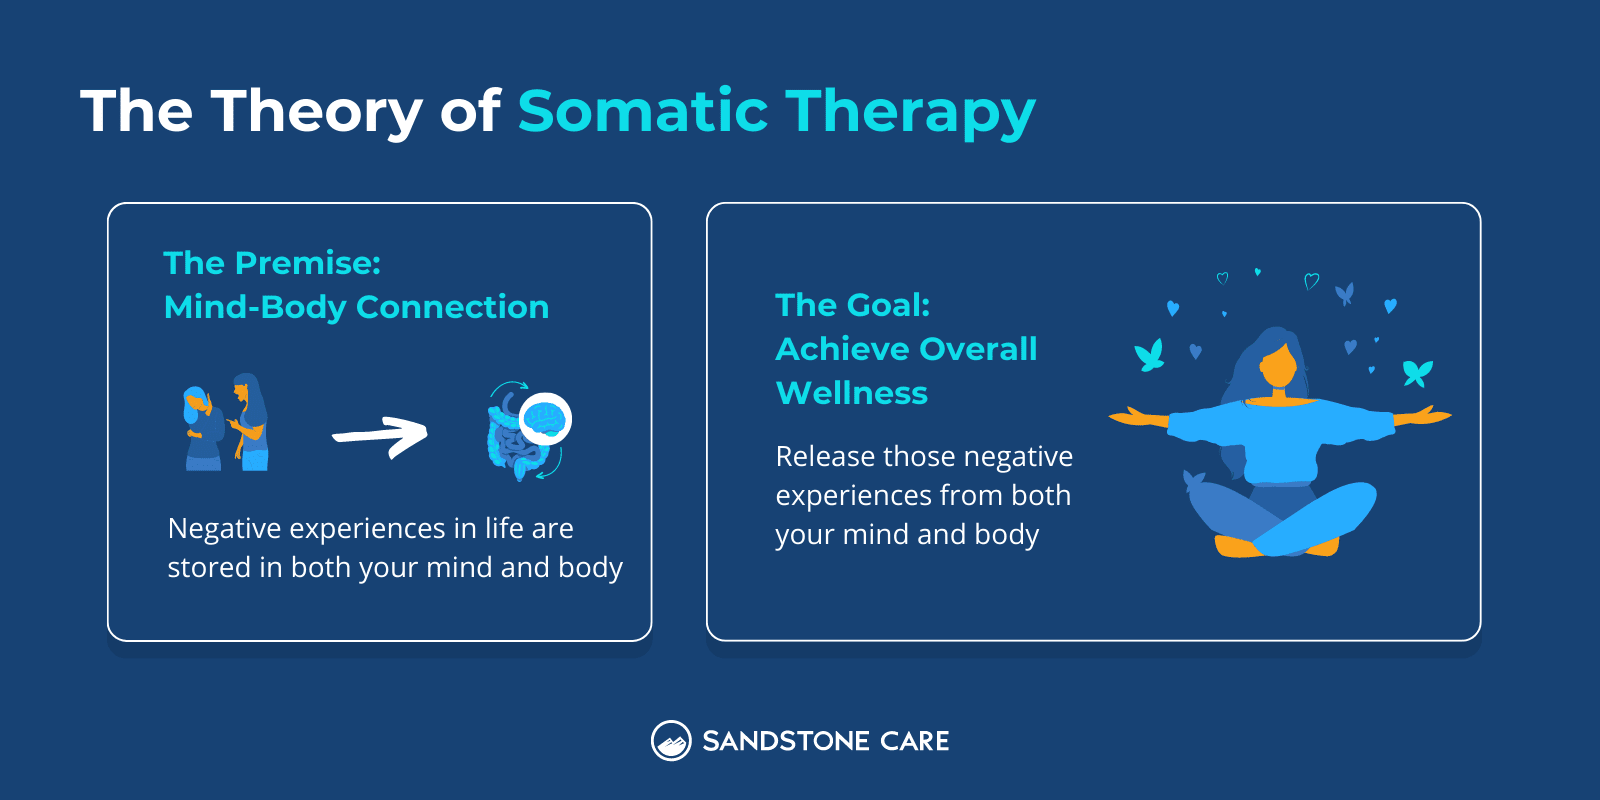 The Theory of Somatic Therapy Infographic